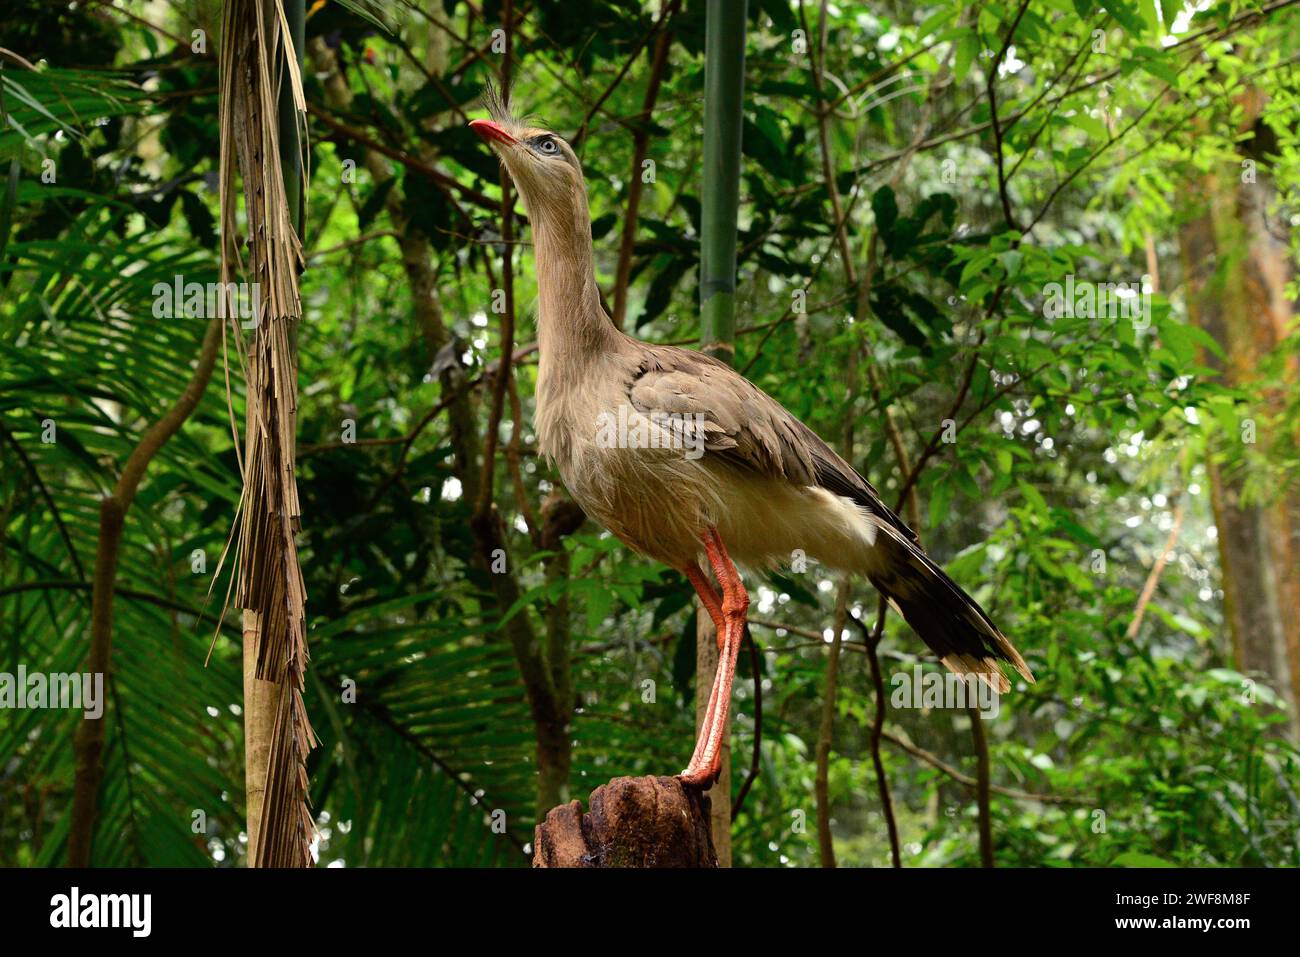 Red-legged seriema (Cariama cristata) is a bird native to Brazil, northern Argentina and Uruguay. This photo was taken in Brazil. Stock Photo